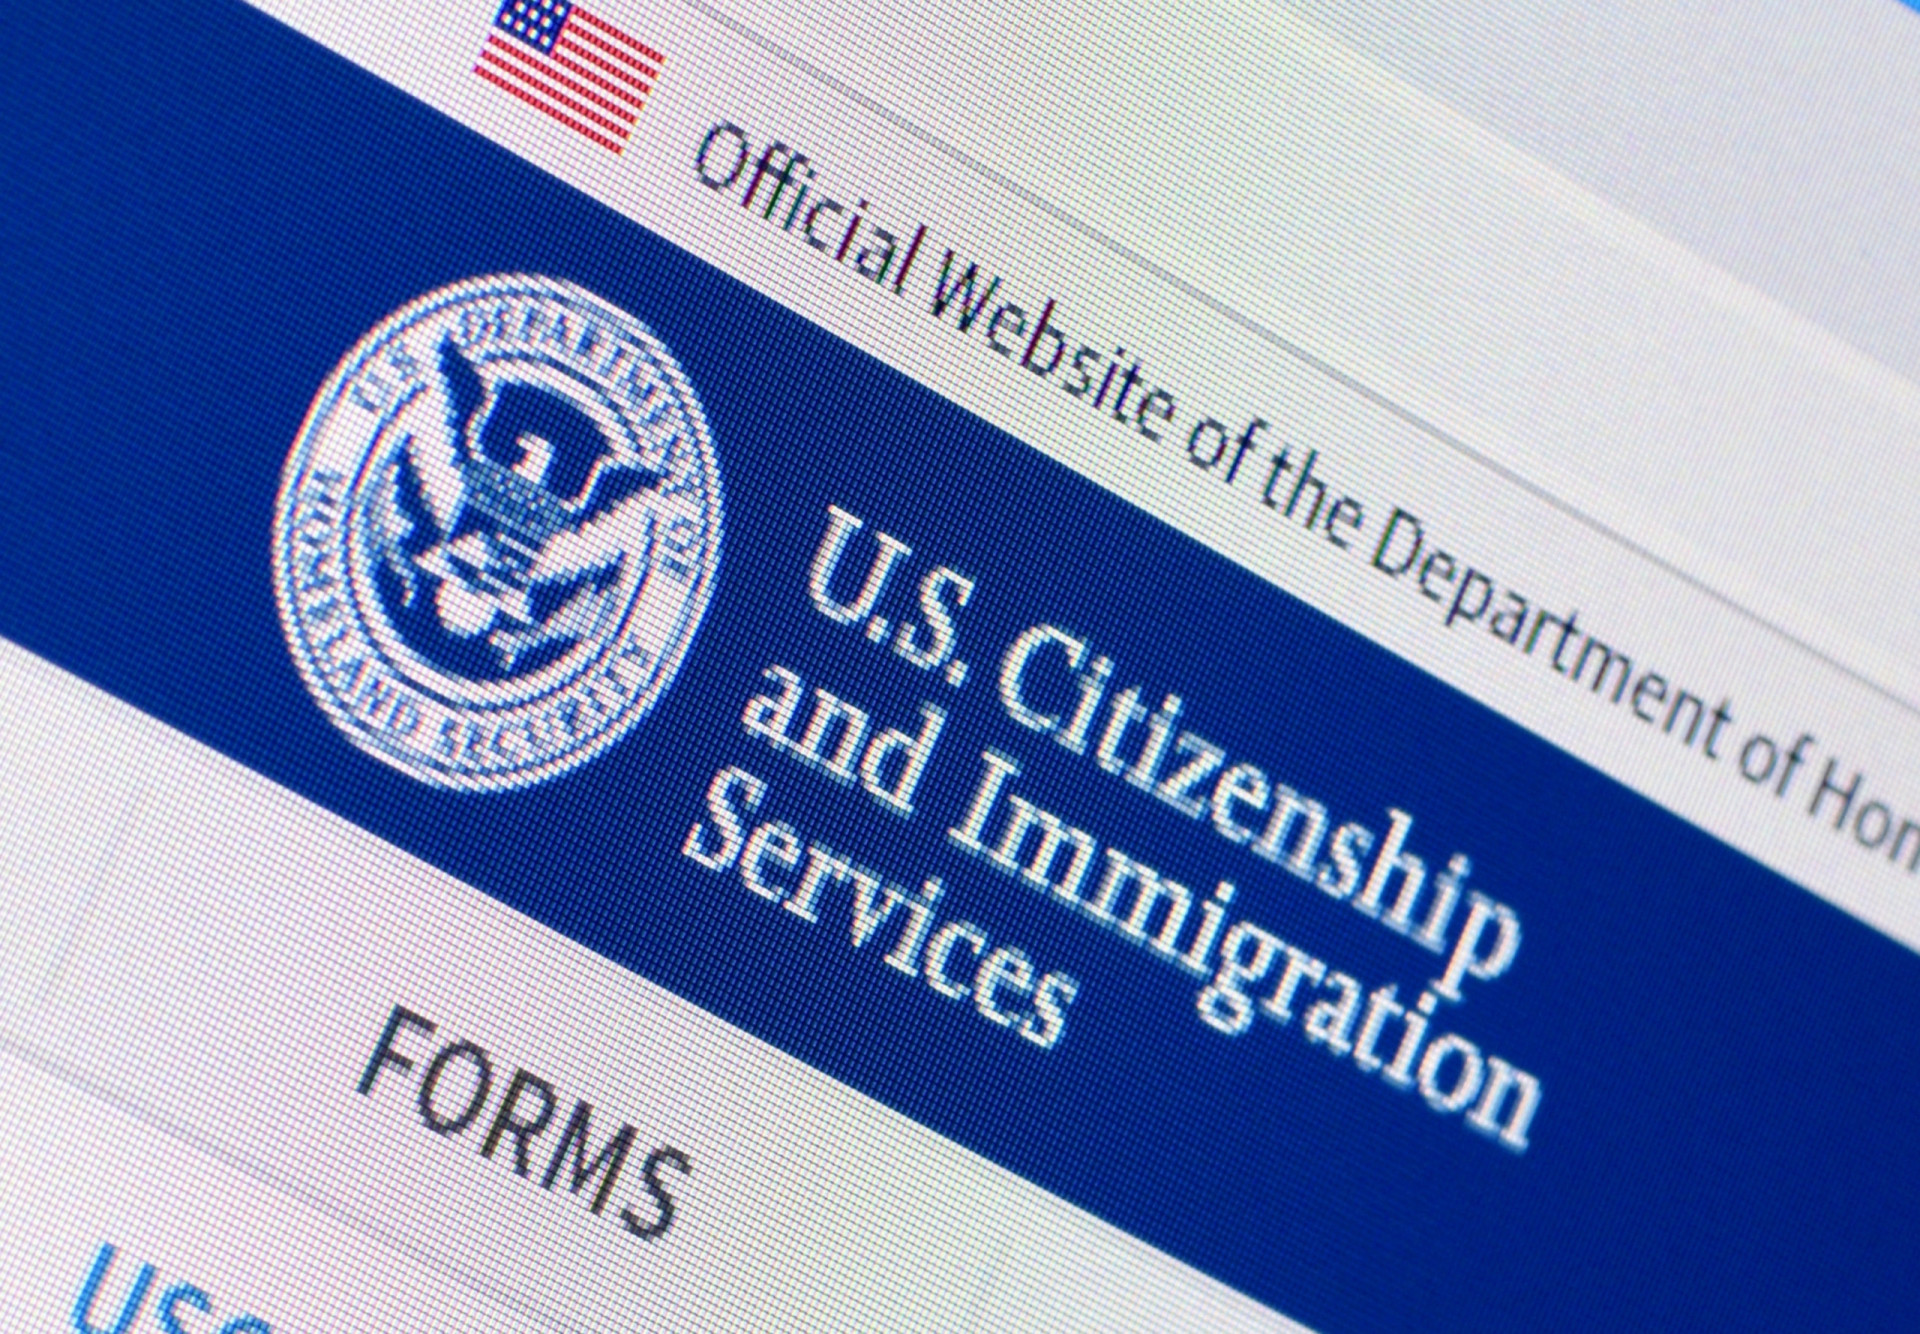 <p>Processing times differ from USCIS office to office. To check the status of your application, open their Processing Time Information page. You can also use the USCIS website to review case status updates.</p><p><a href="https://www.msn.com/en-us/community/channel/vid-7xx8mnucu55yw63we9va2gwr7uihbxwc68fxqp25x6tg4ftibpra?cvid=94631541bc0f4f89bfd59158d696ad7e">Follow us and access great exclusive content every day</a></p>